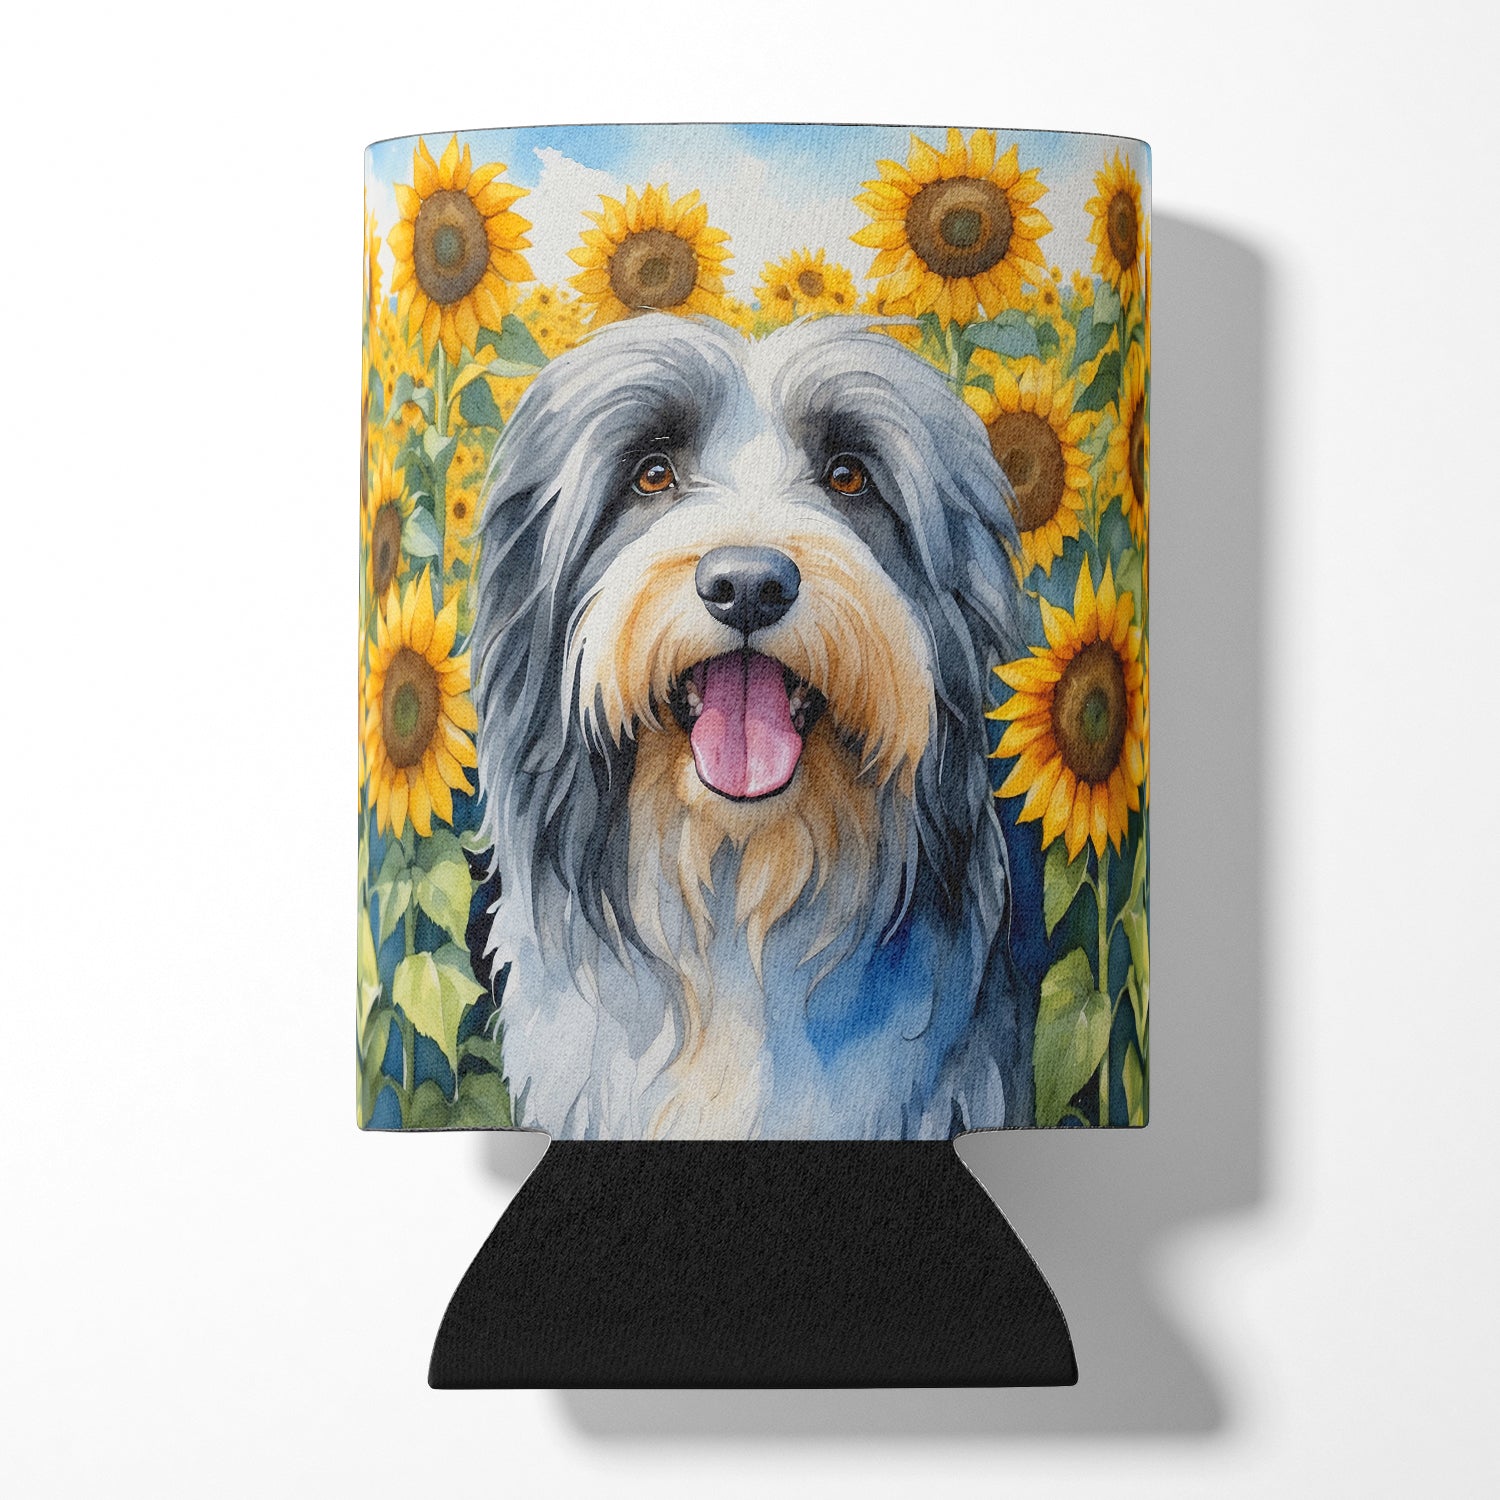 Buy this Bearded Collie in Sunflowers Can or Bottle Hugger